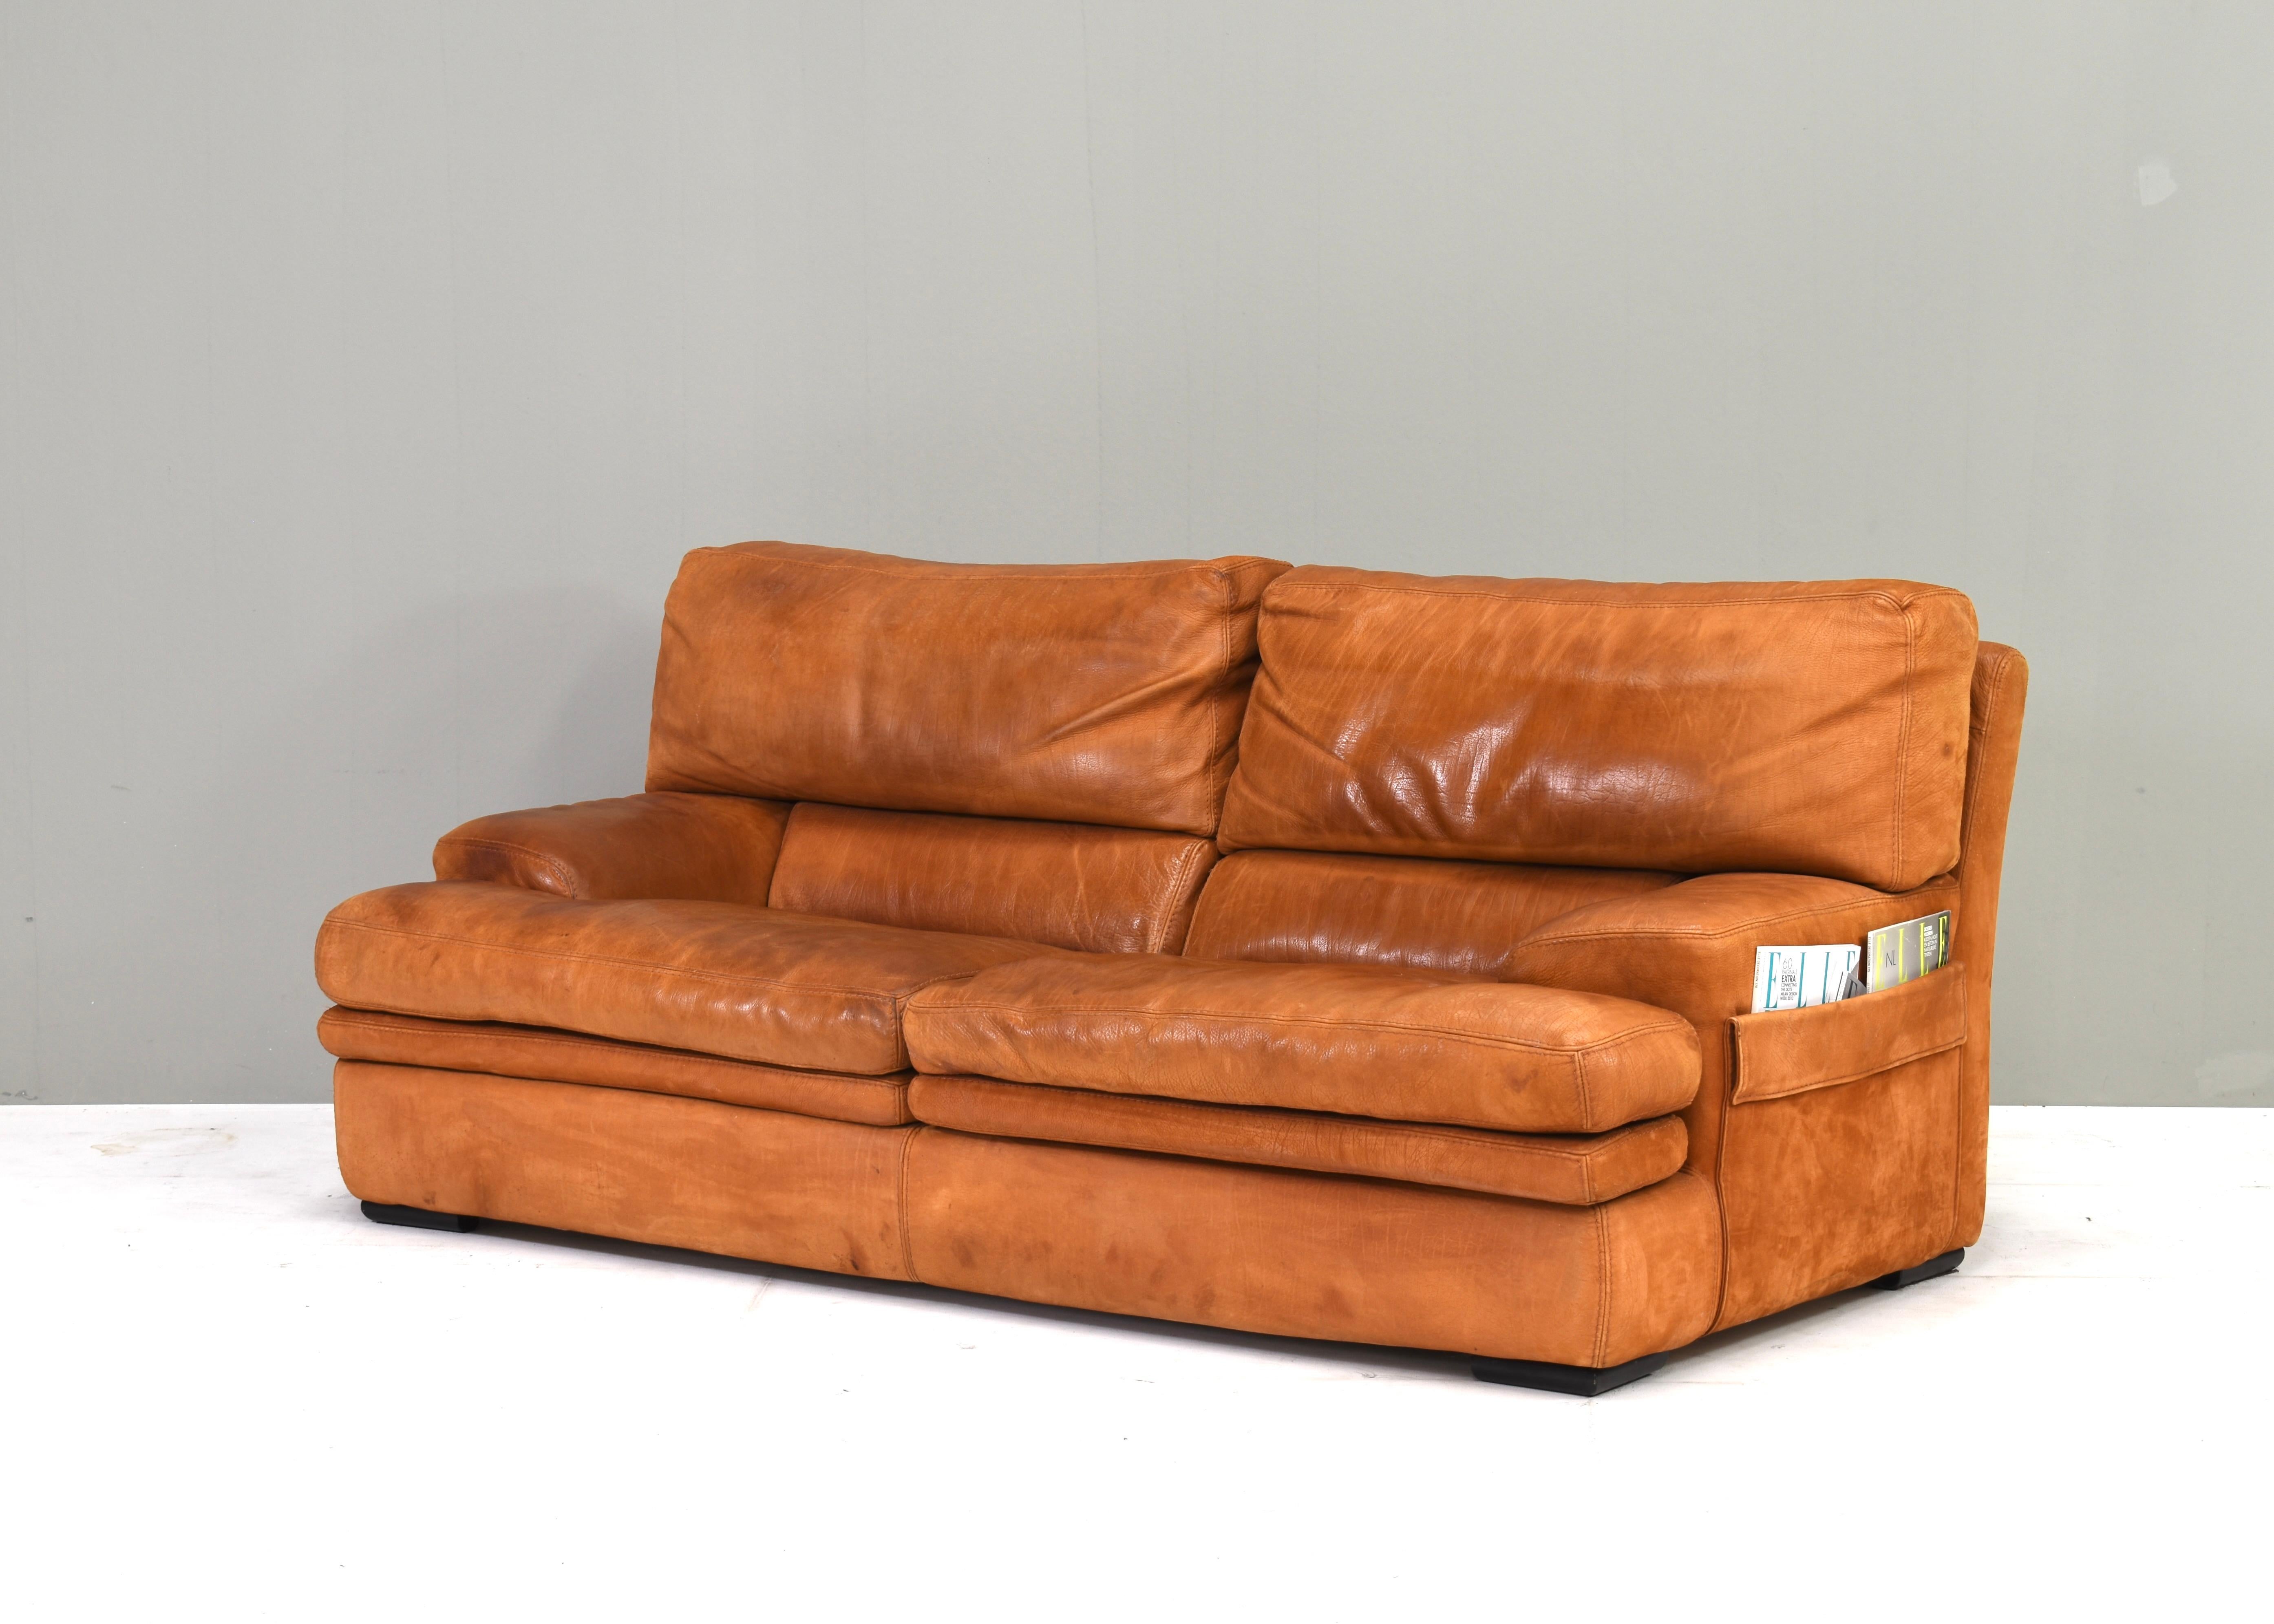 Mid-Century Modern Roche Bobois sofa in patinated Tan / Cognac leather – France, circa 1970/80 For Sale